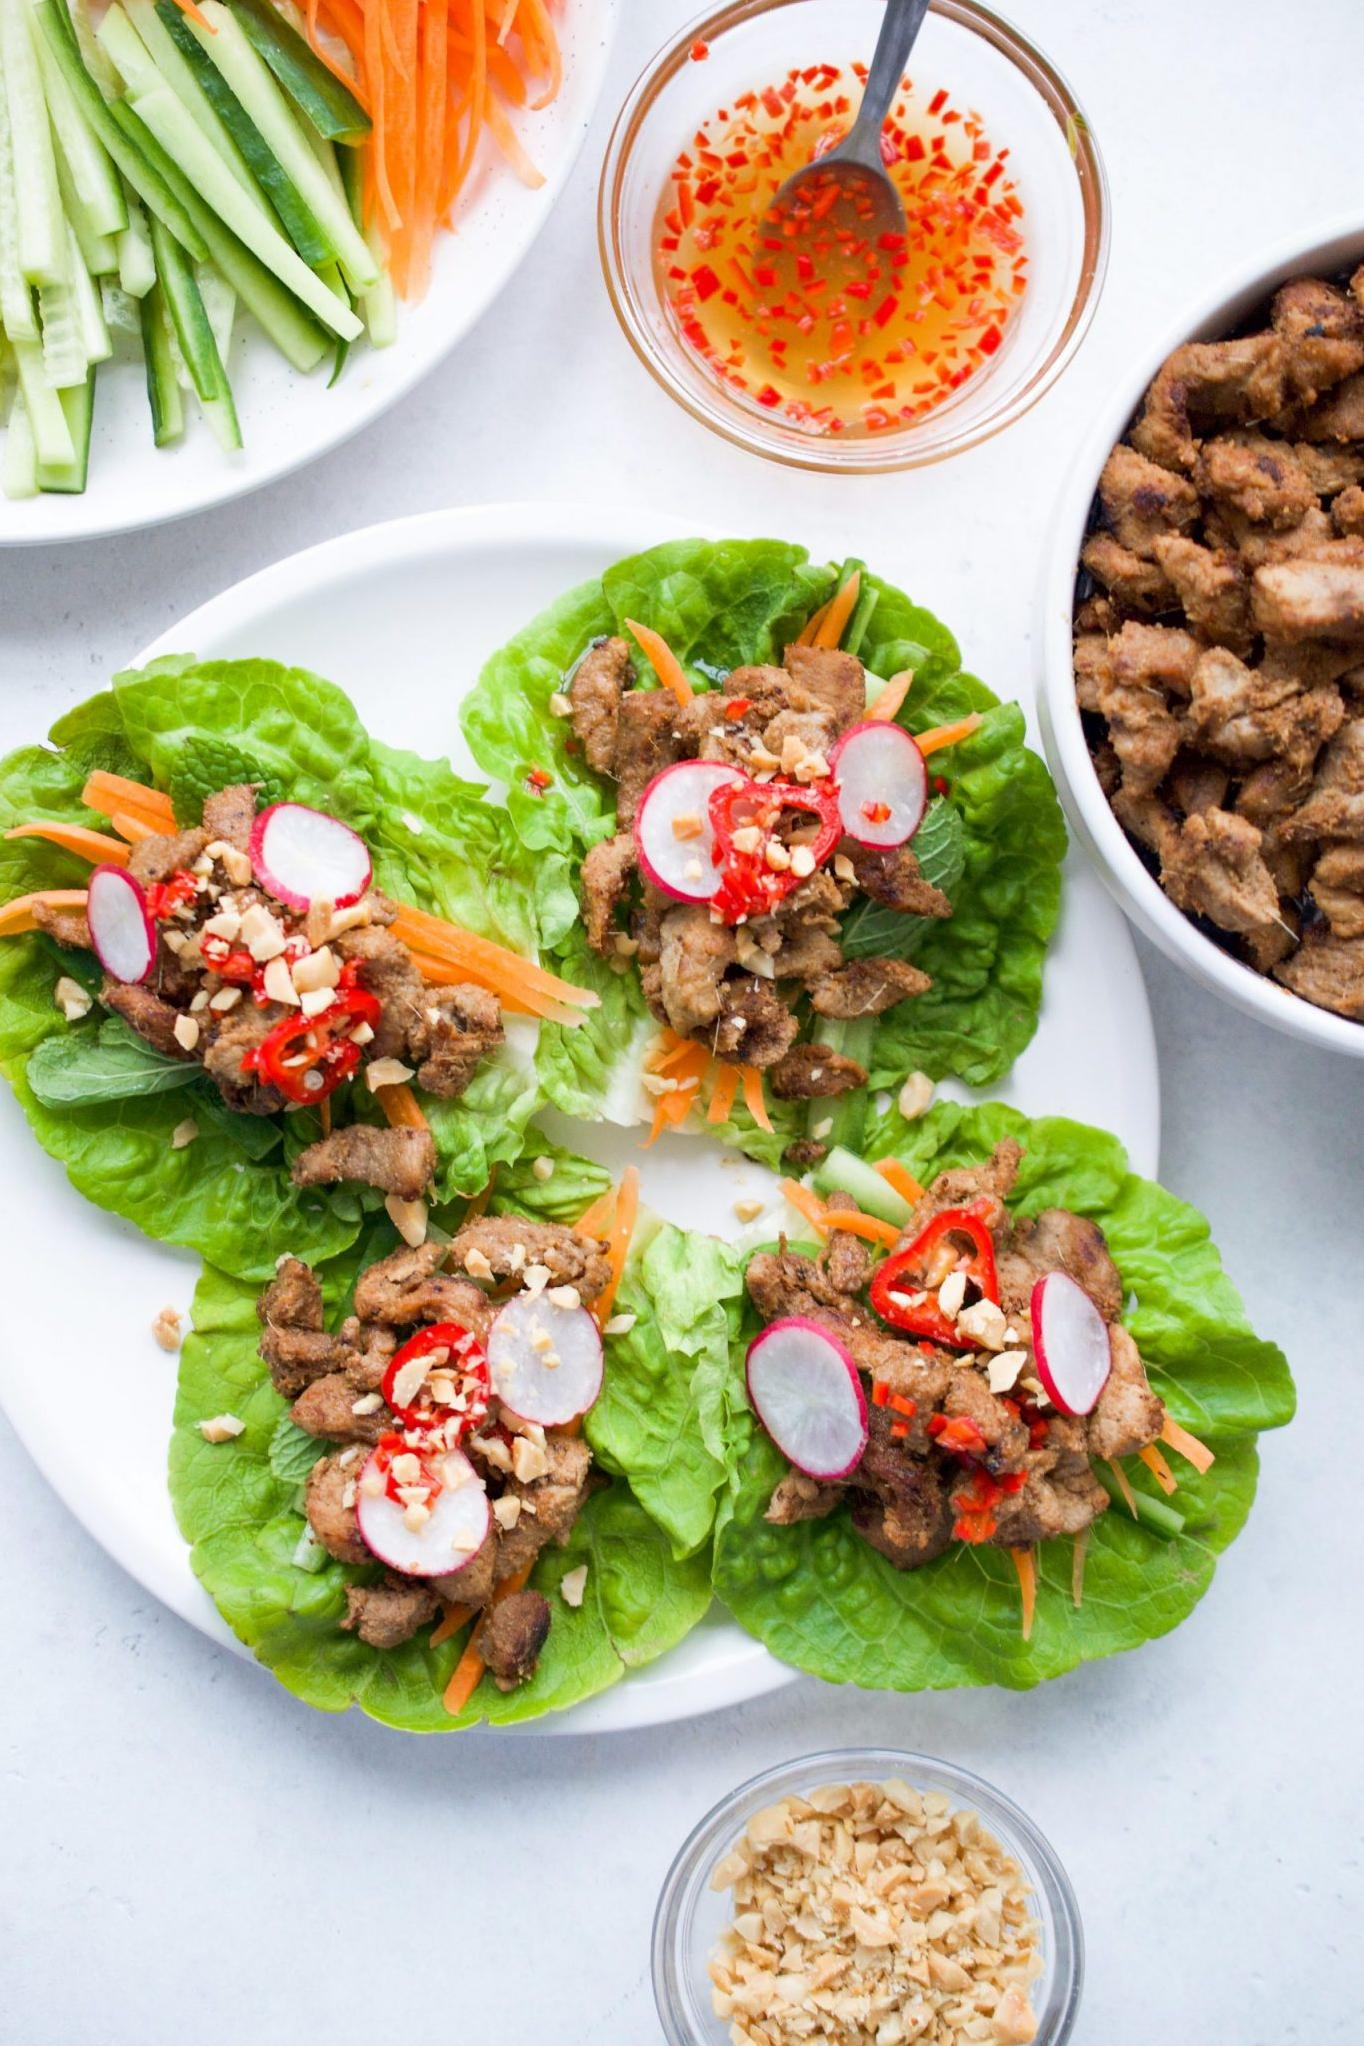  Want to impress your guests with some Asian-style appetizers? Try these grilled pork lettuce wraps, they won't disappoint!